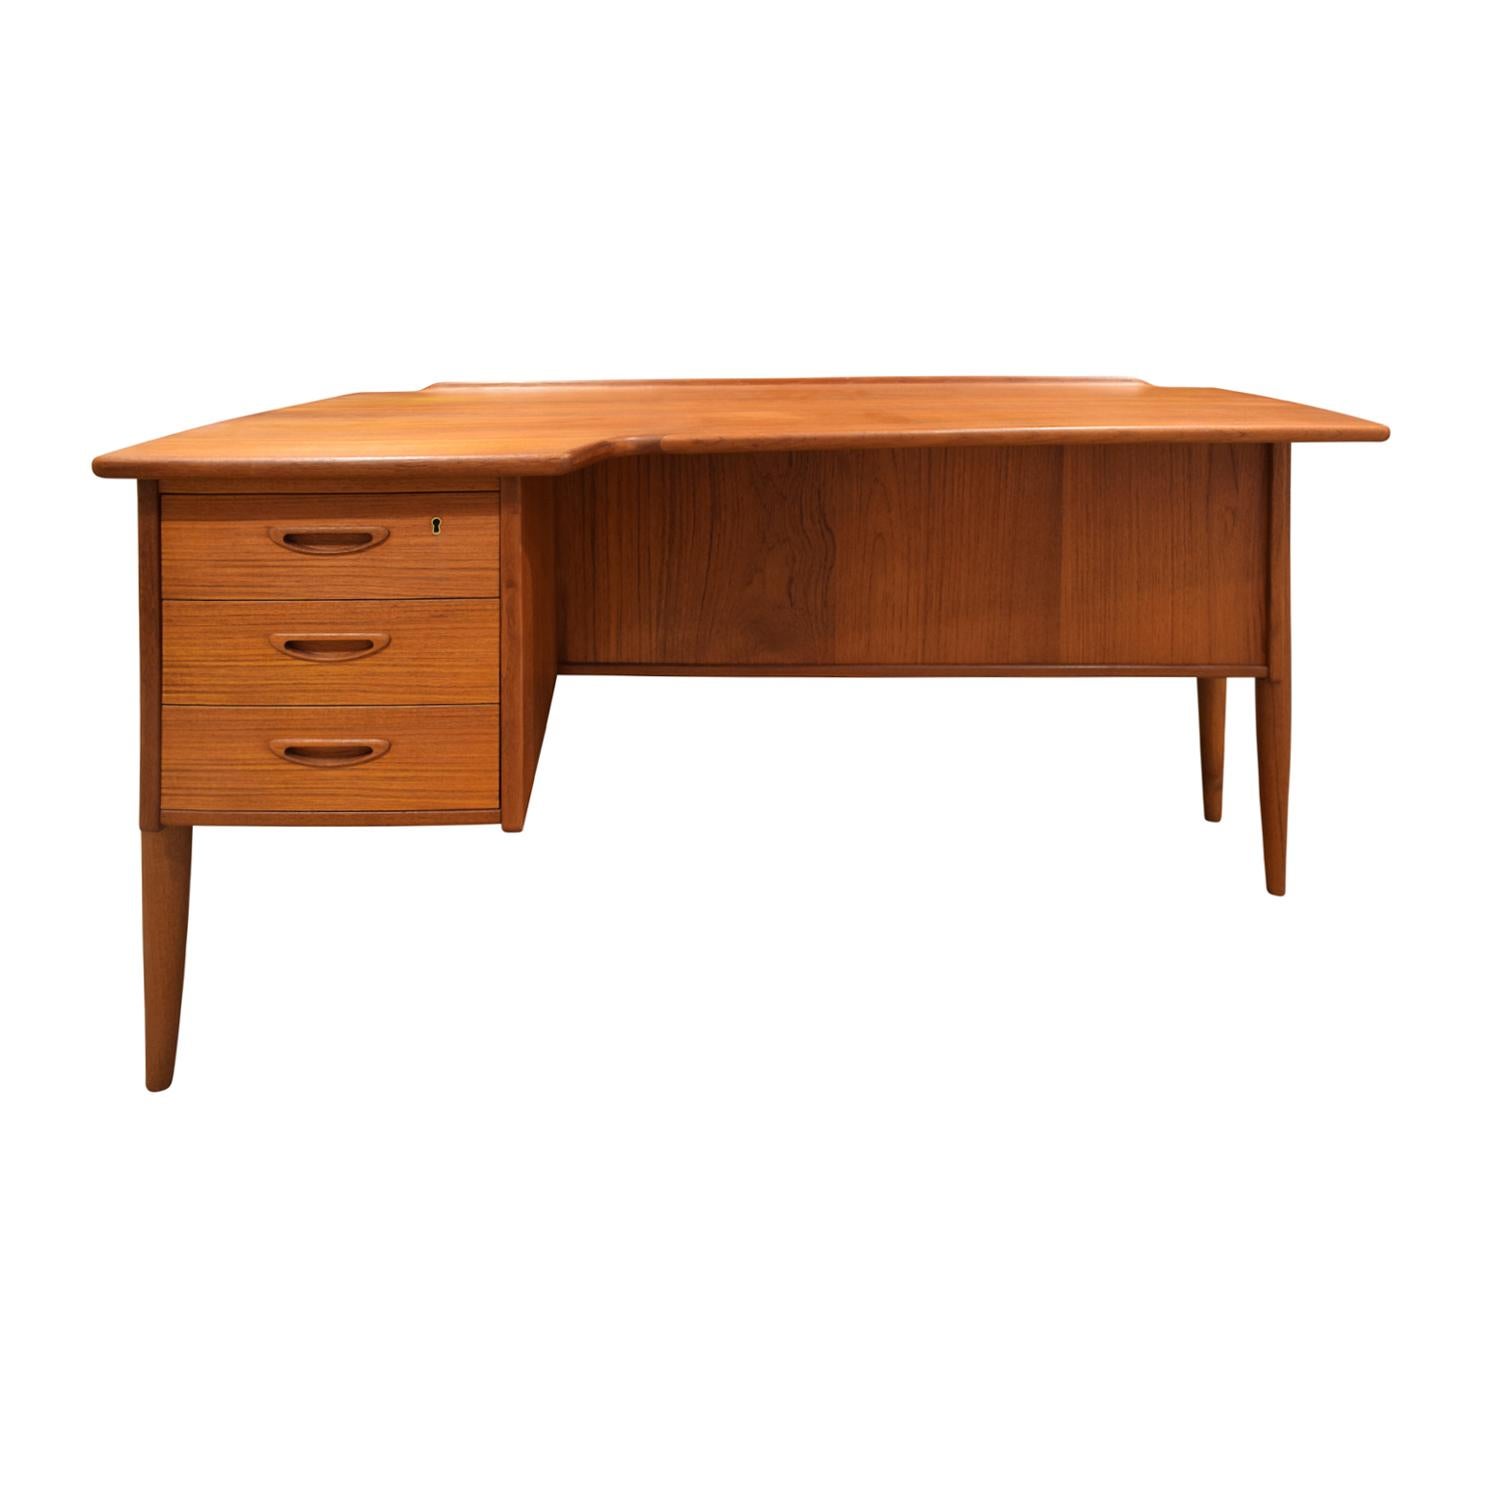 Desk model A10 in teak with drawers on left and partner compartment on other side by Göran Strand for Lelångs Möbelfabrik, Sweden 1960’s. This desk is beautifully made. Shown with Danish chair sold separately.